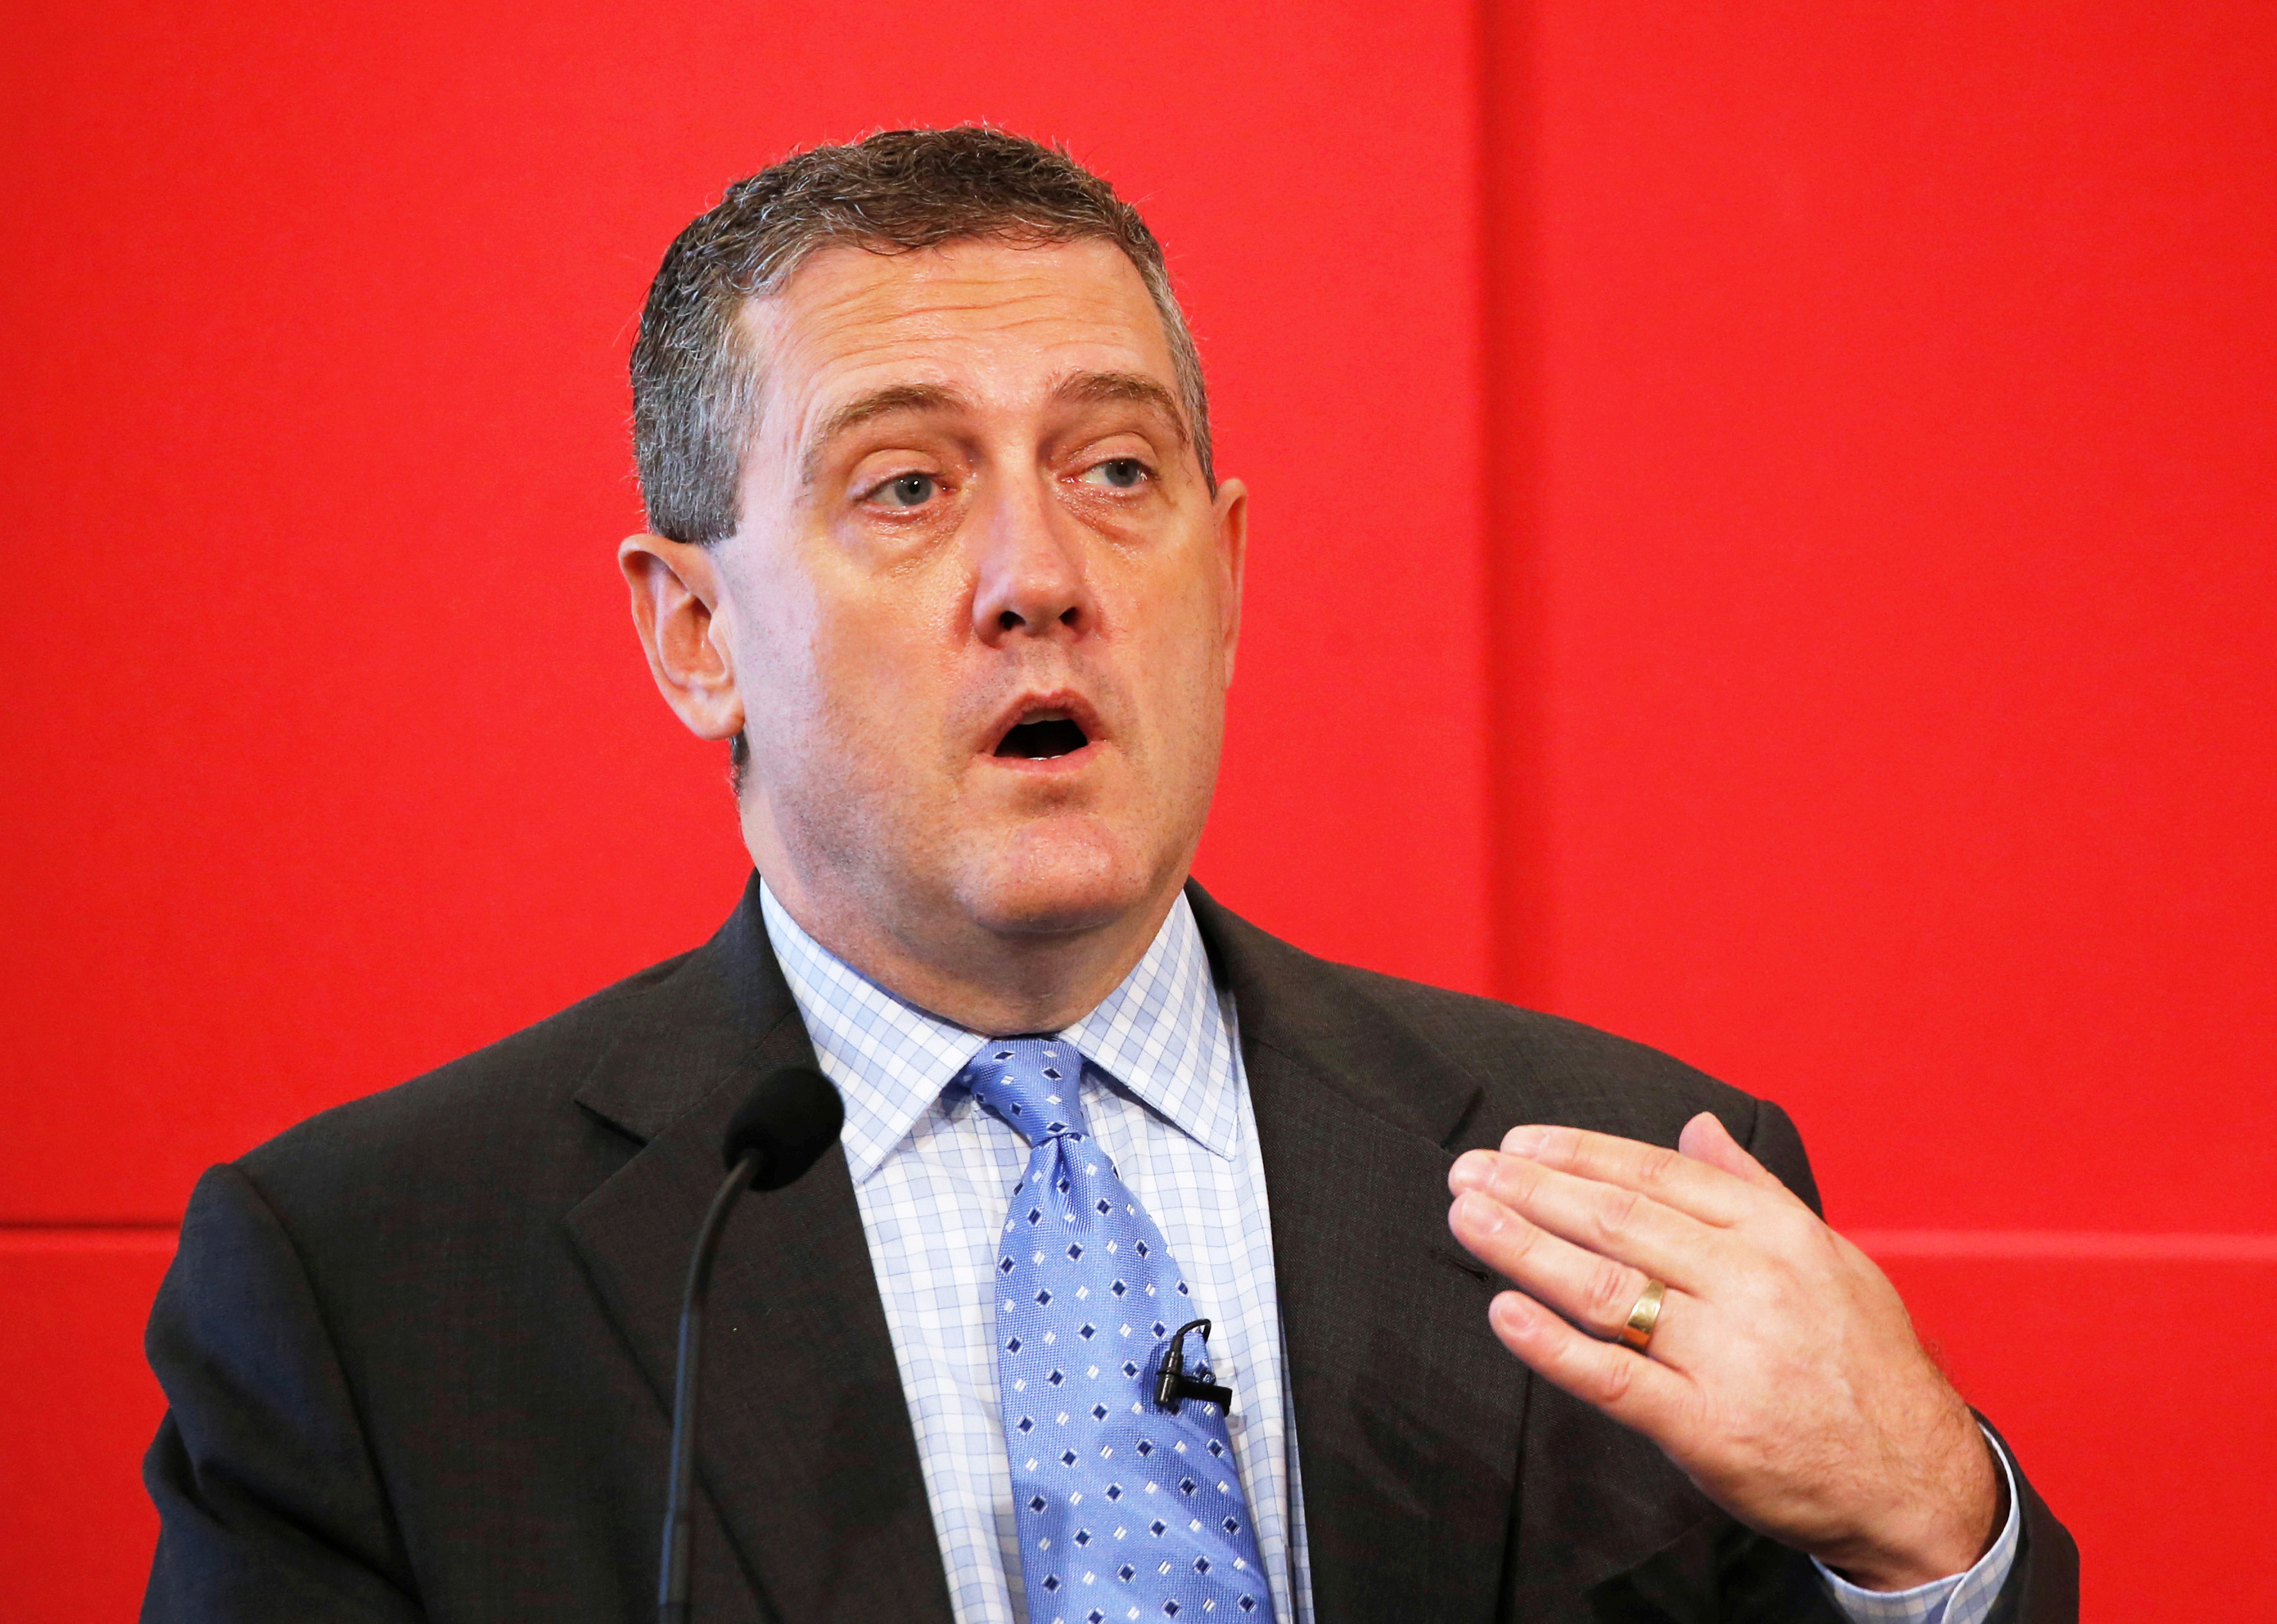 St. Louis Fed President James Bullard speaks at a public lecture on 